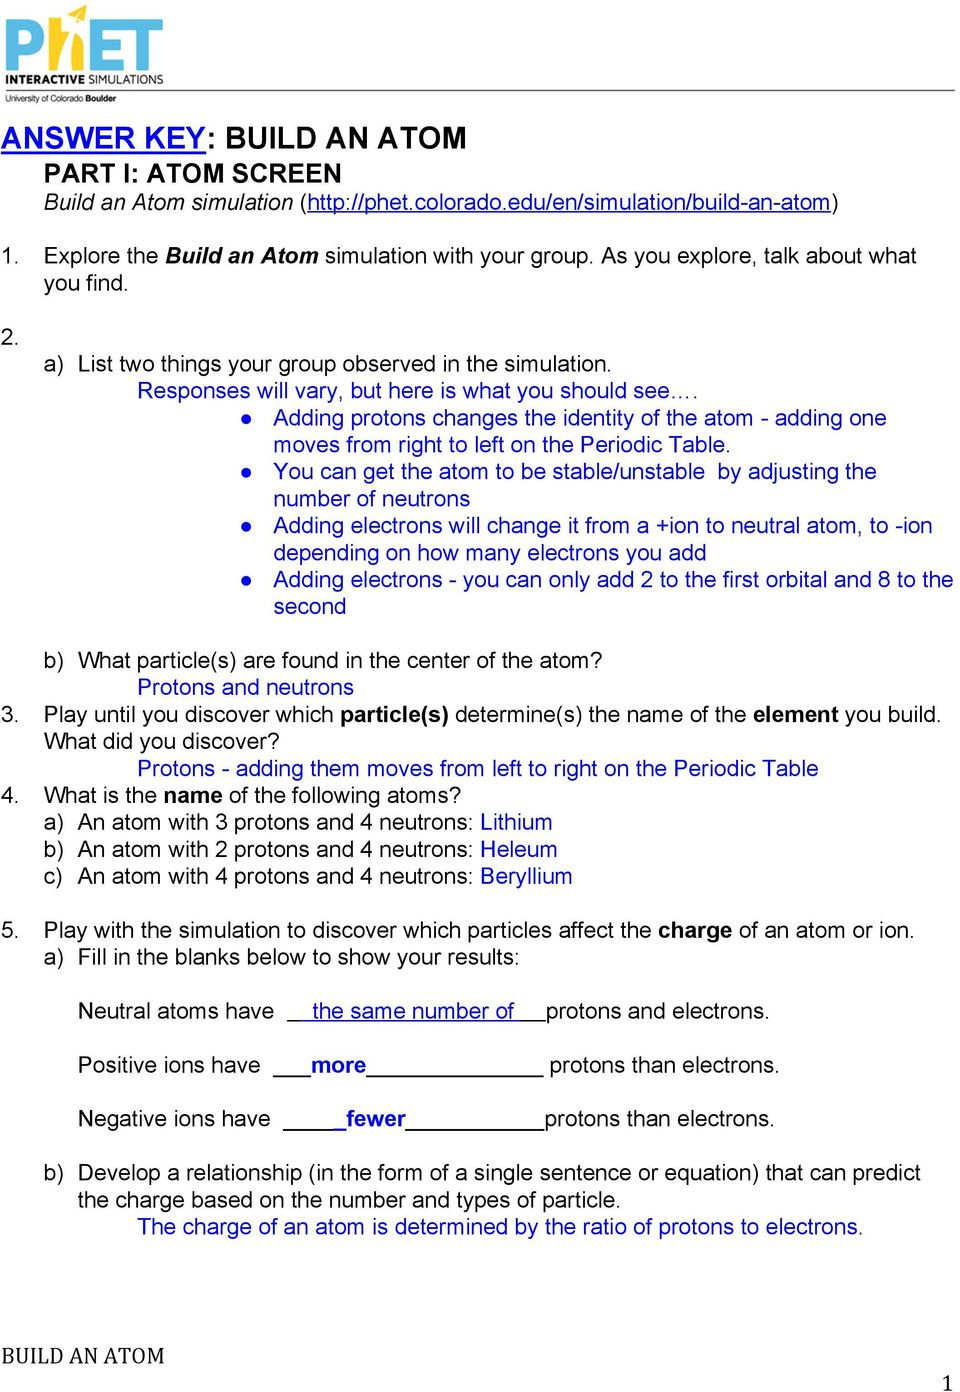 Energy Forms And Changes Simulation Worksheet Answers Db excel